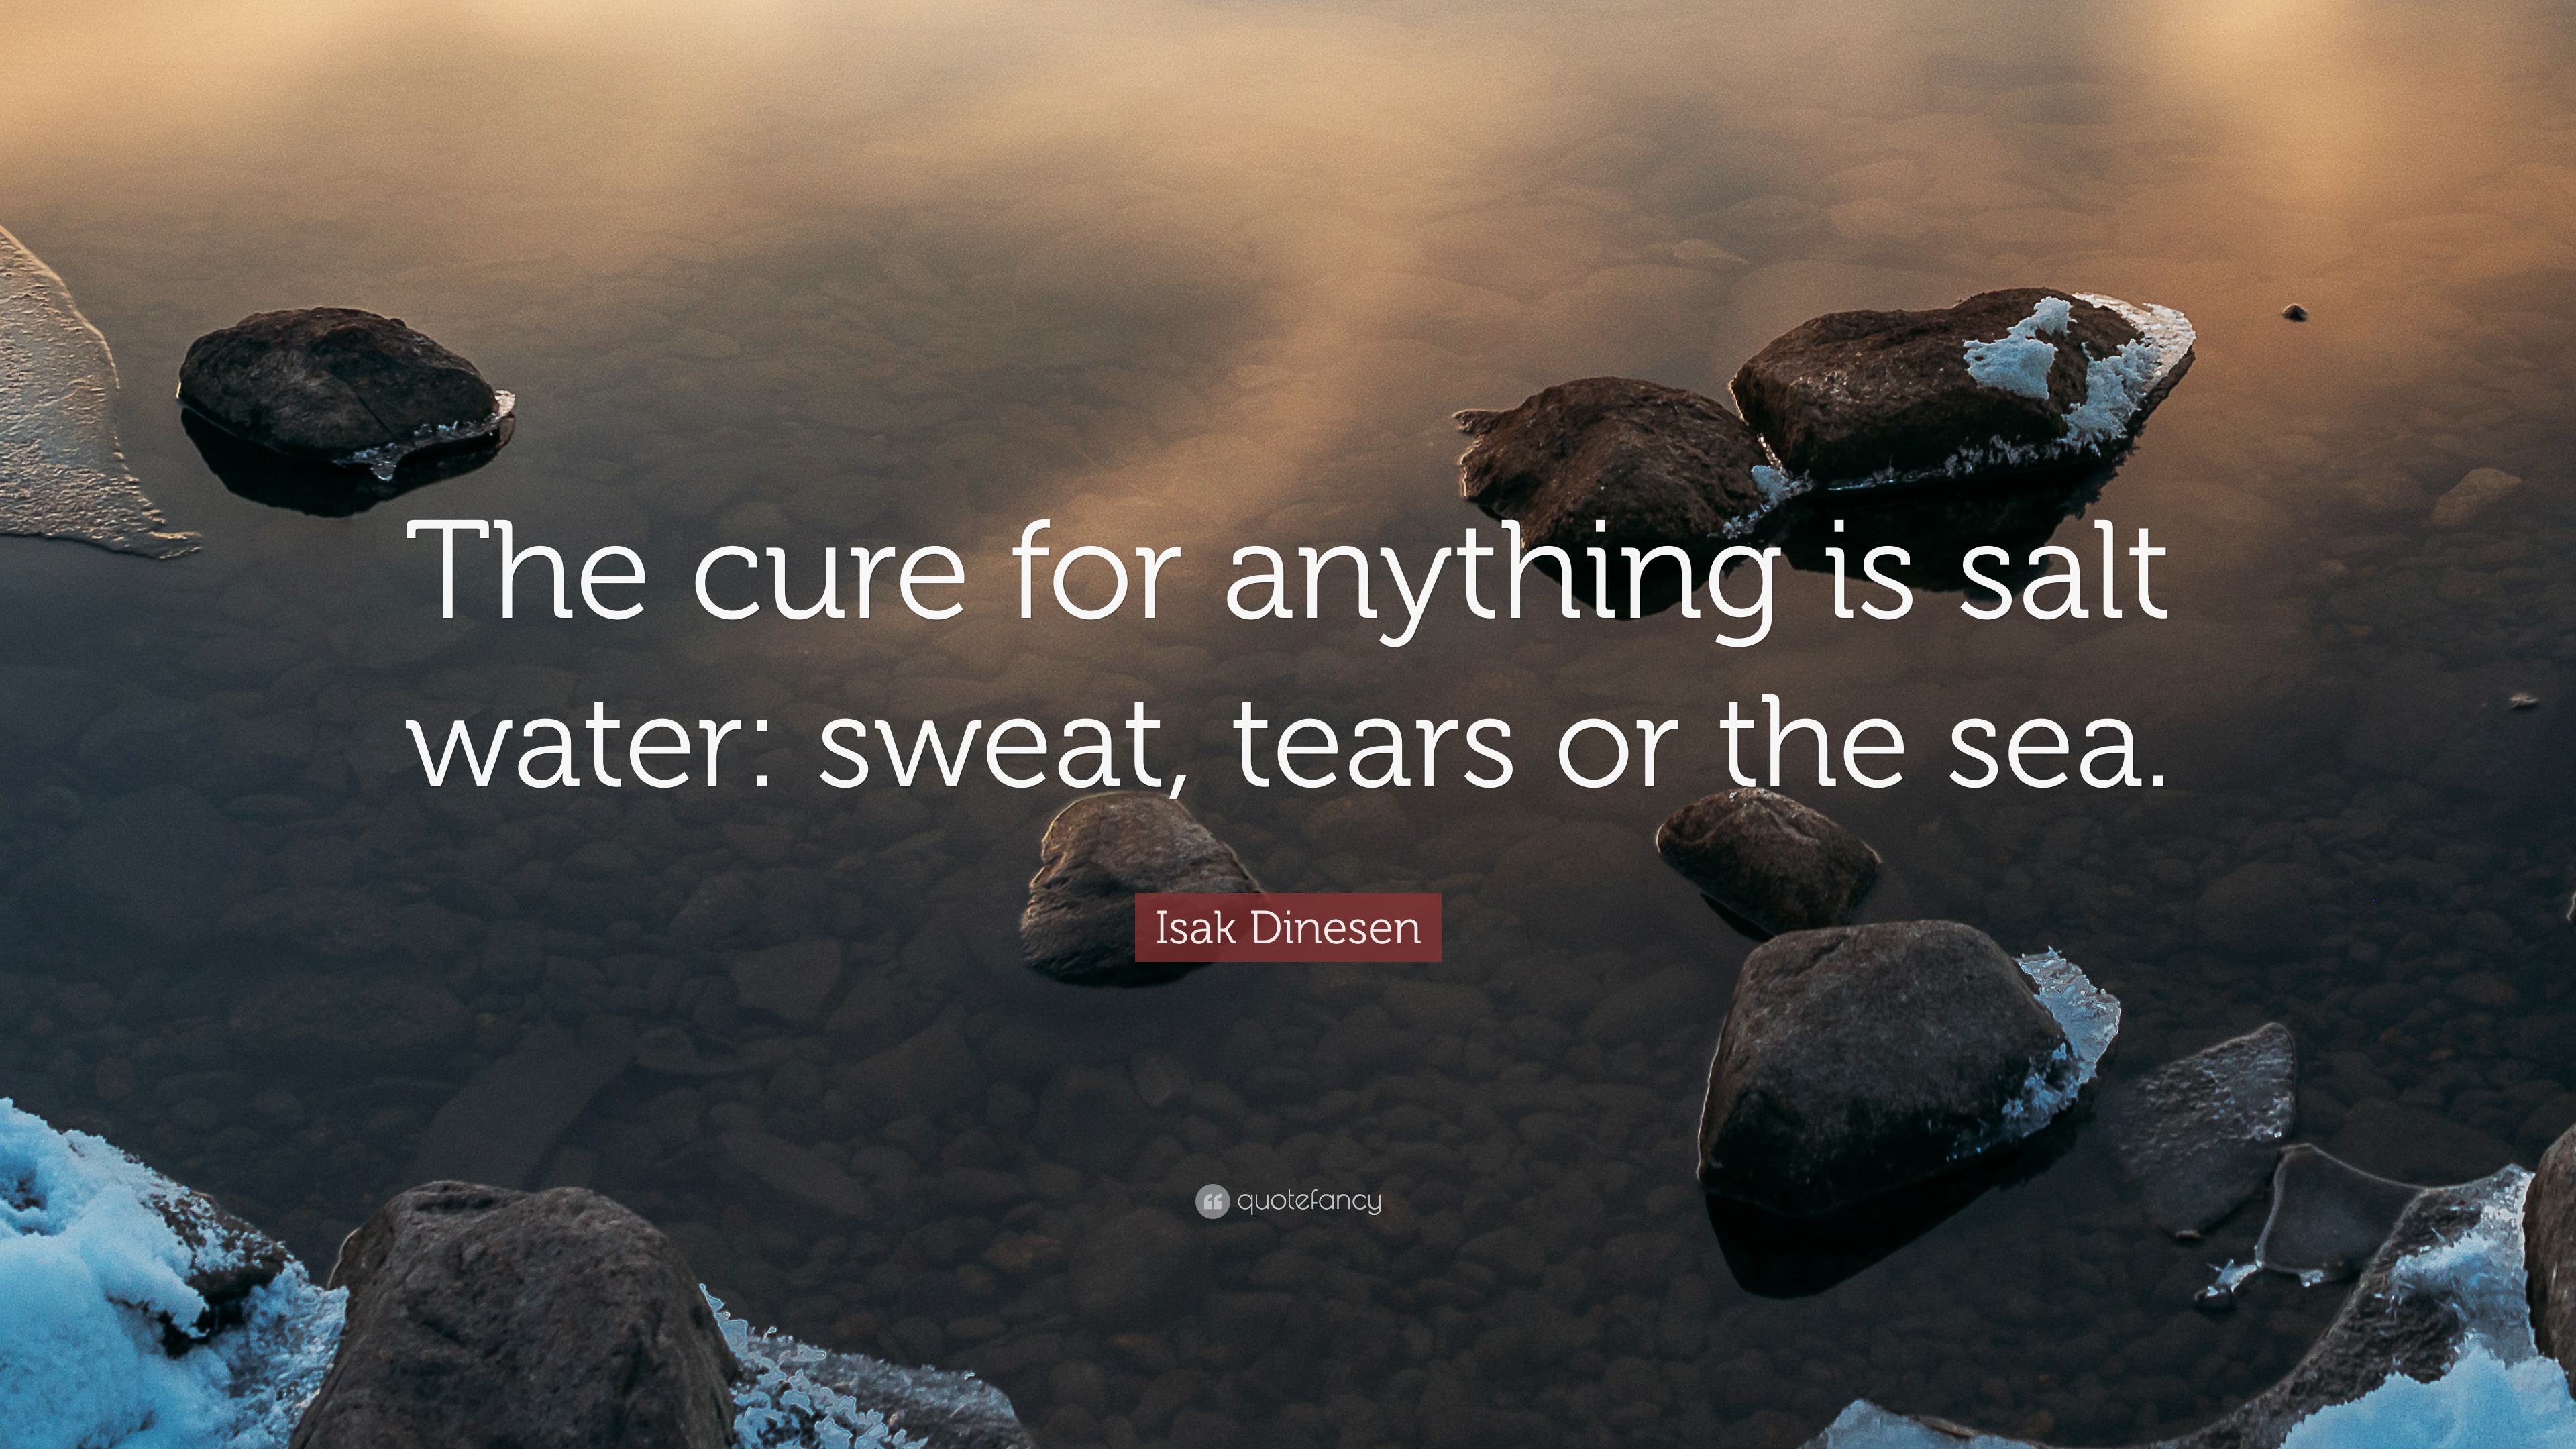 Isak Dinesen Quote: "The cure for anything is salt water: sweat, tears or the sea." (12 ...